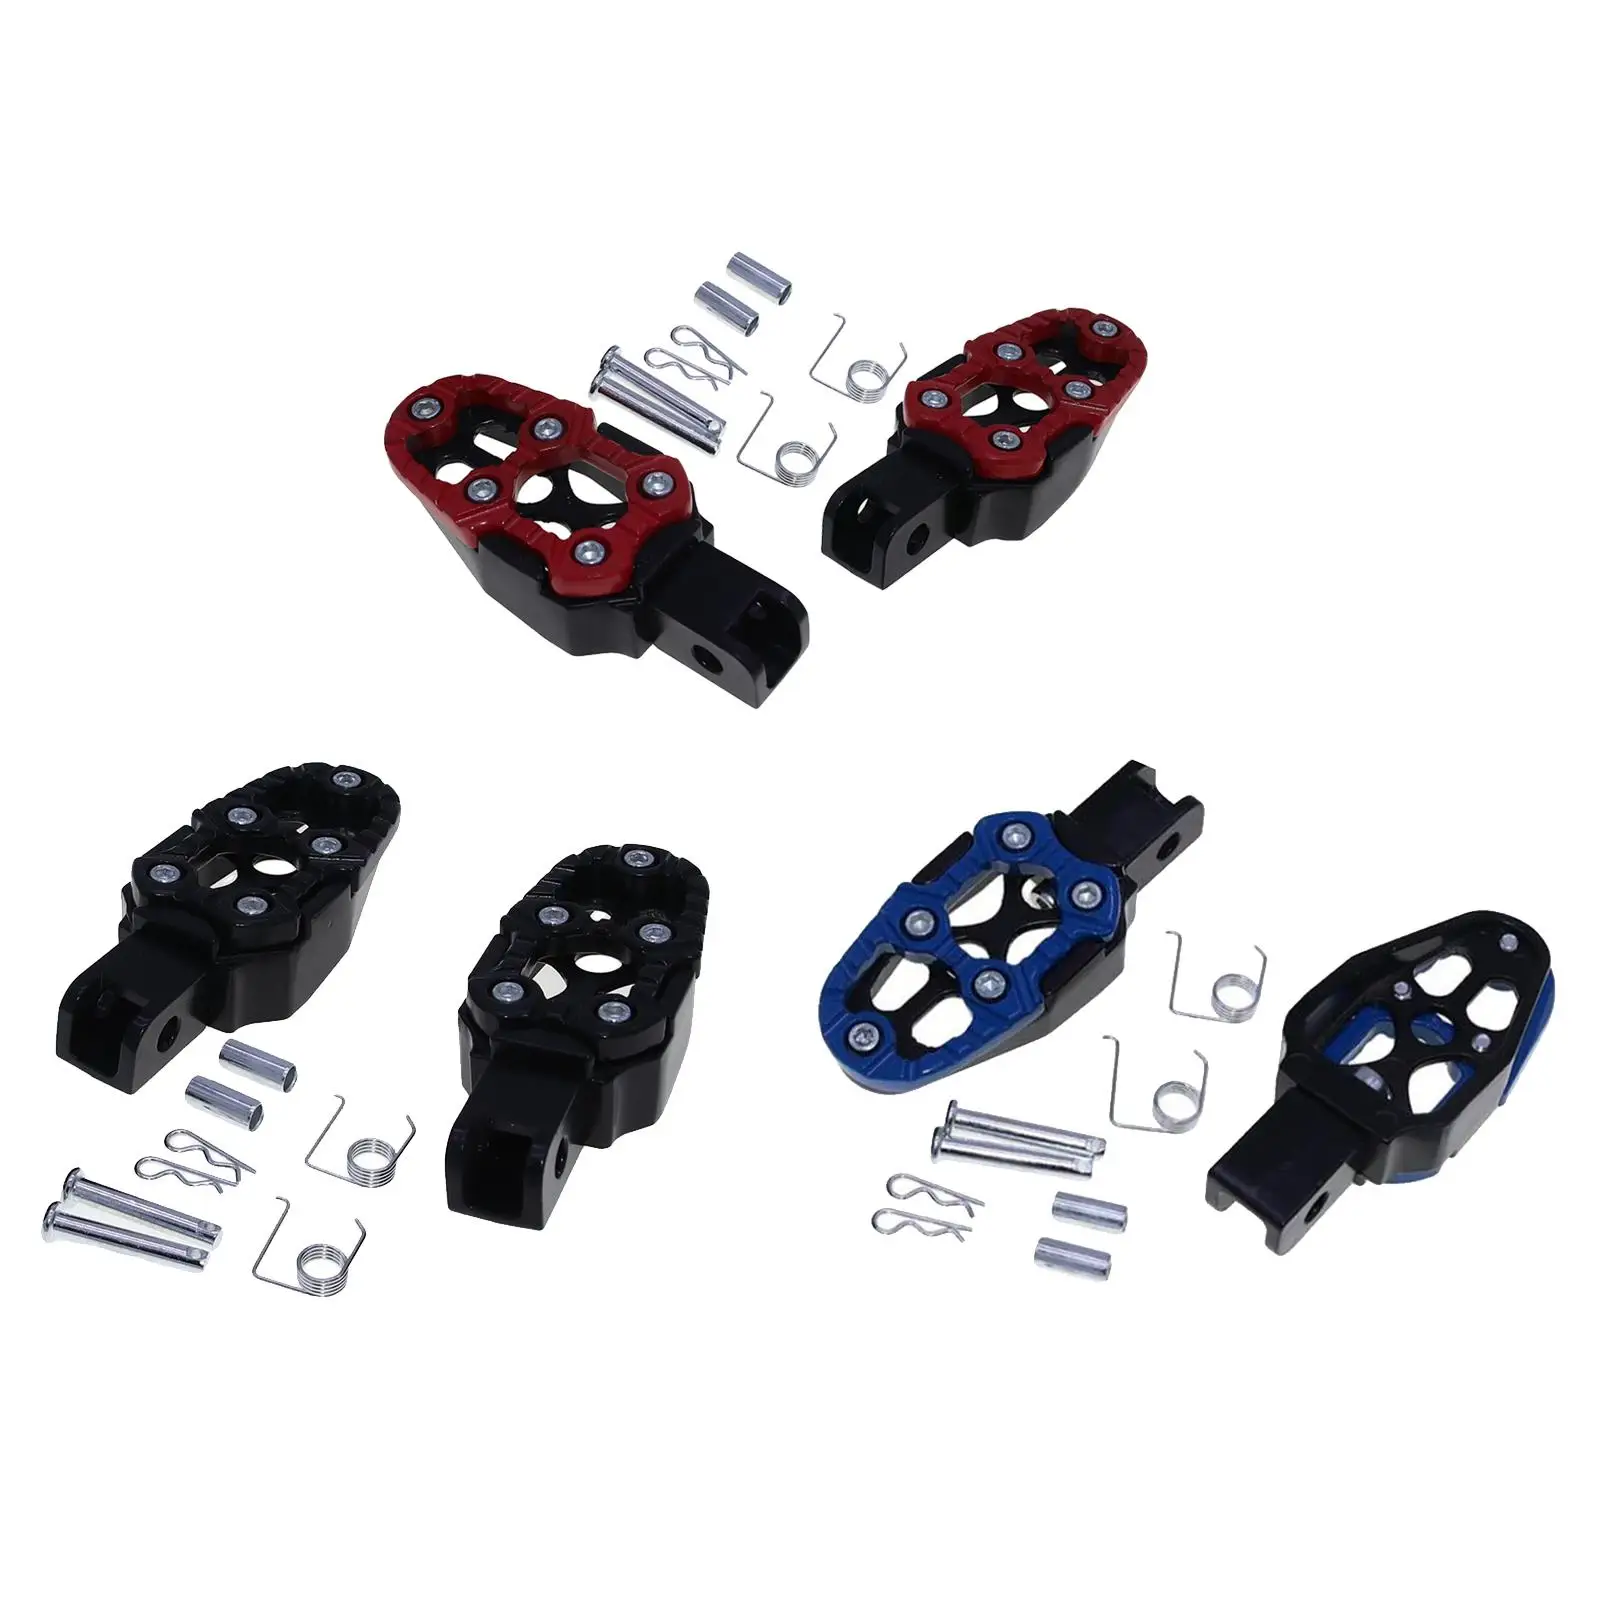 Foot Pedals Rests Durable Aluminum Alloy bike Replaces Easy to Install Professional Portable Motorcycle Back Foot Pegs